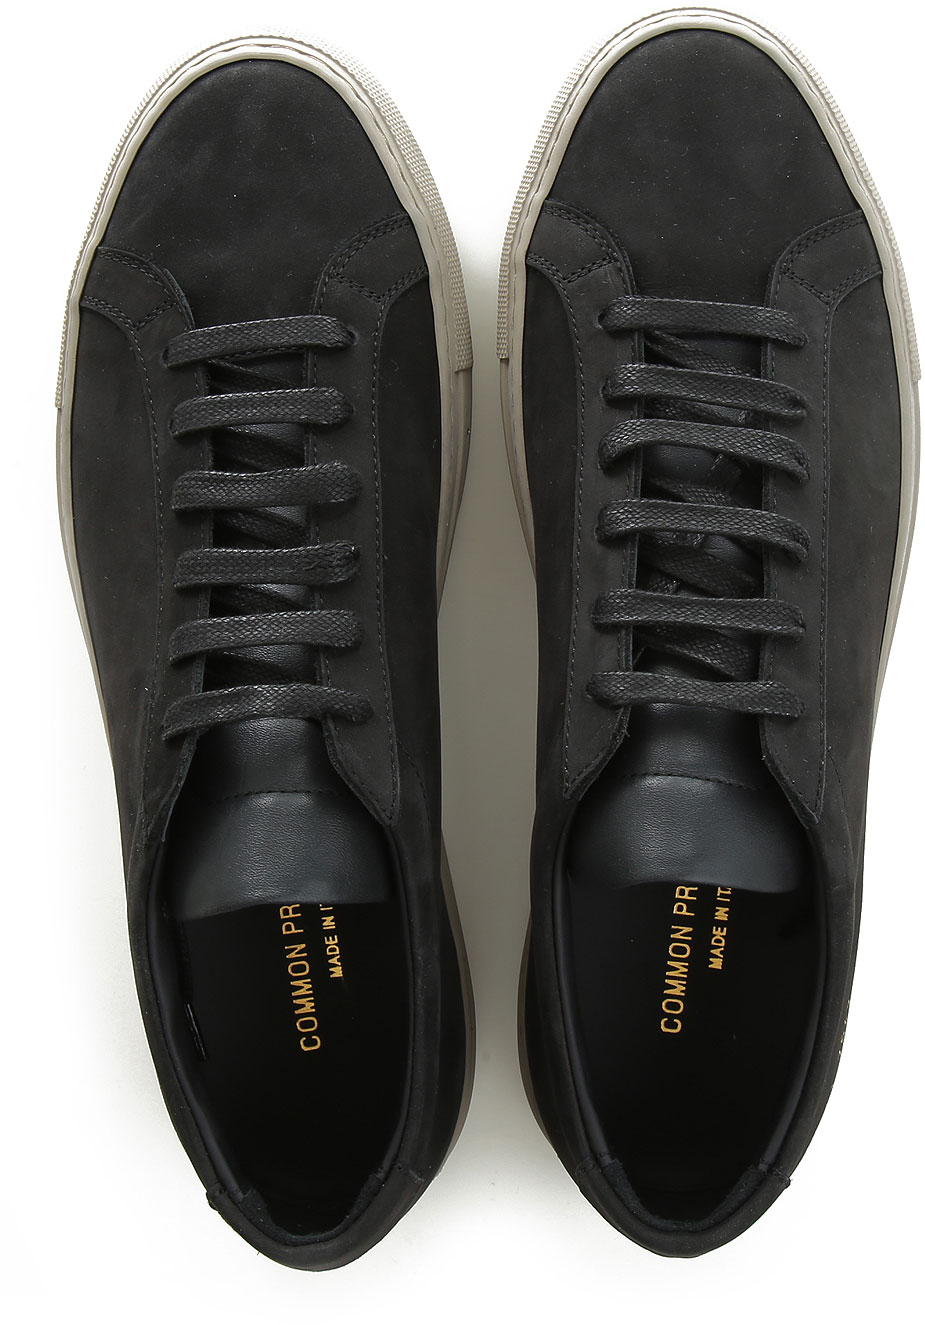 Mens Shoes Common Projects, Style code: 2310-7547-